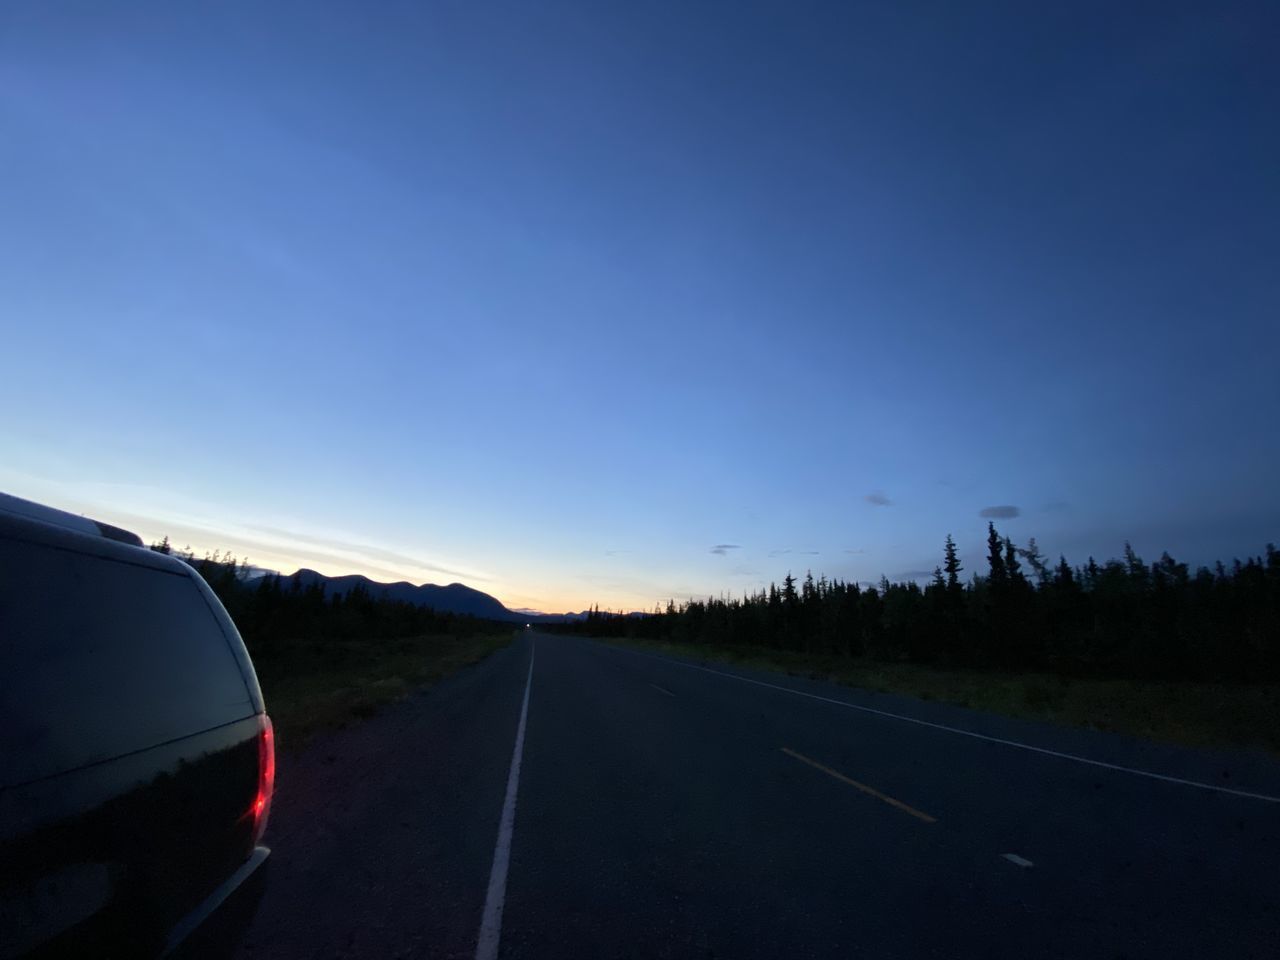 VIEW OF ROAD AGAINST SKY DURING SUNSET